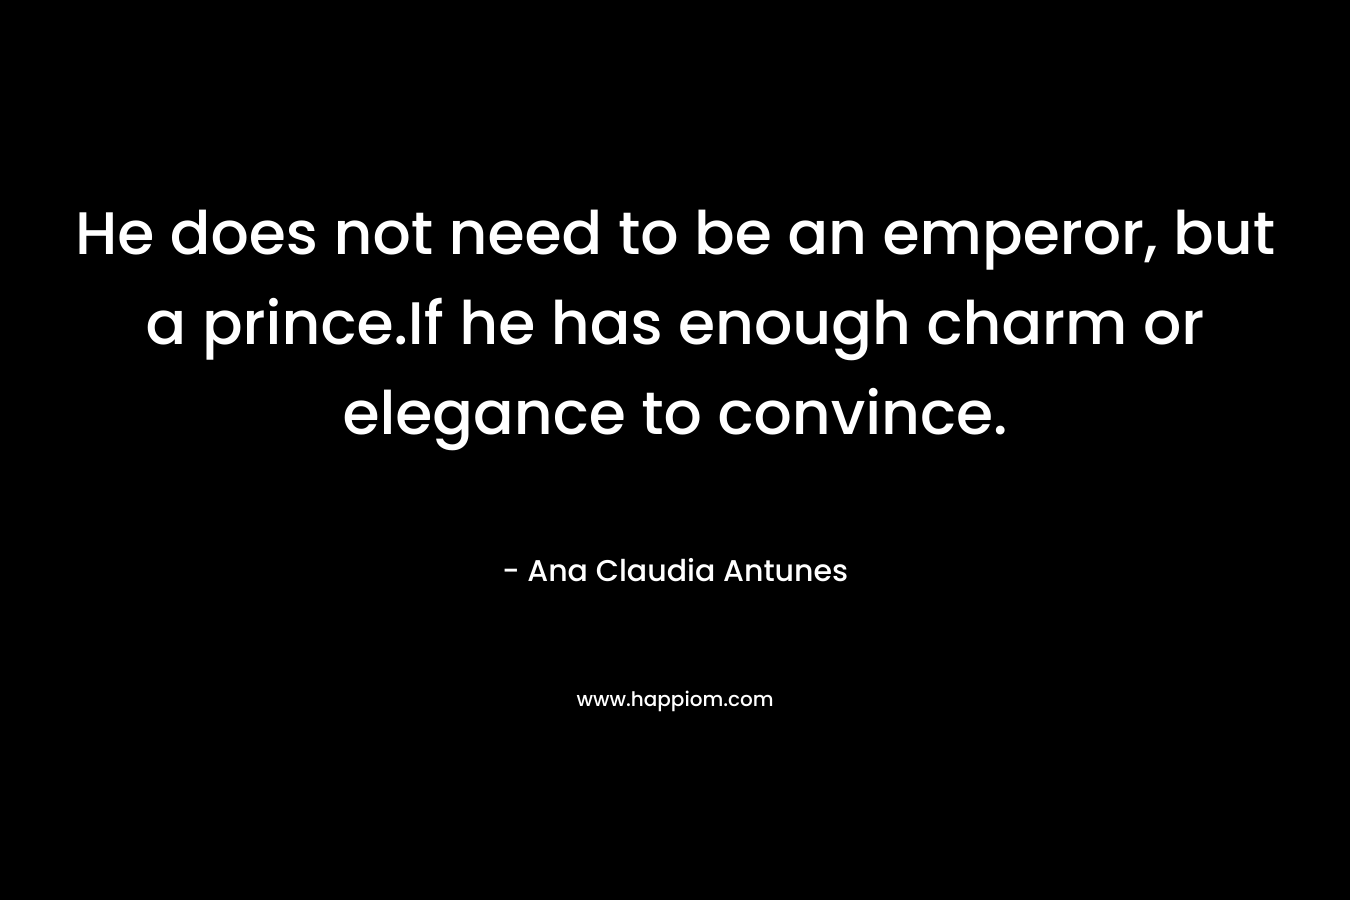 He does not need to be an emperor, but a prince.If he has enough charm or elegance to convince. – Ana Claudia Antunes